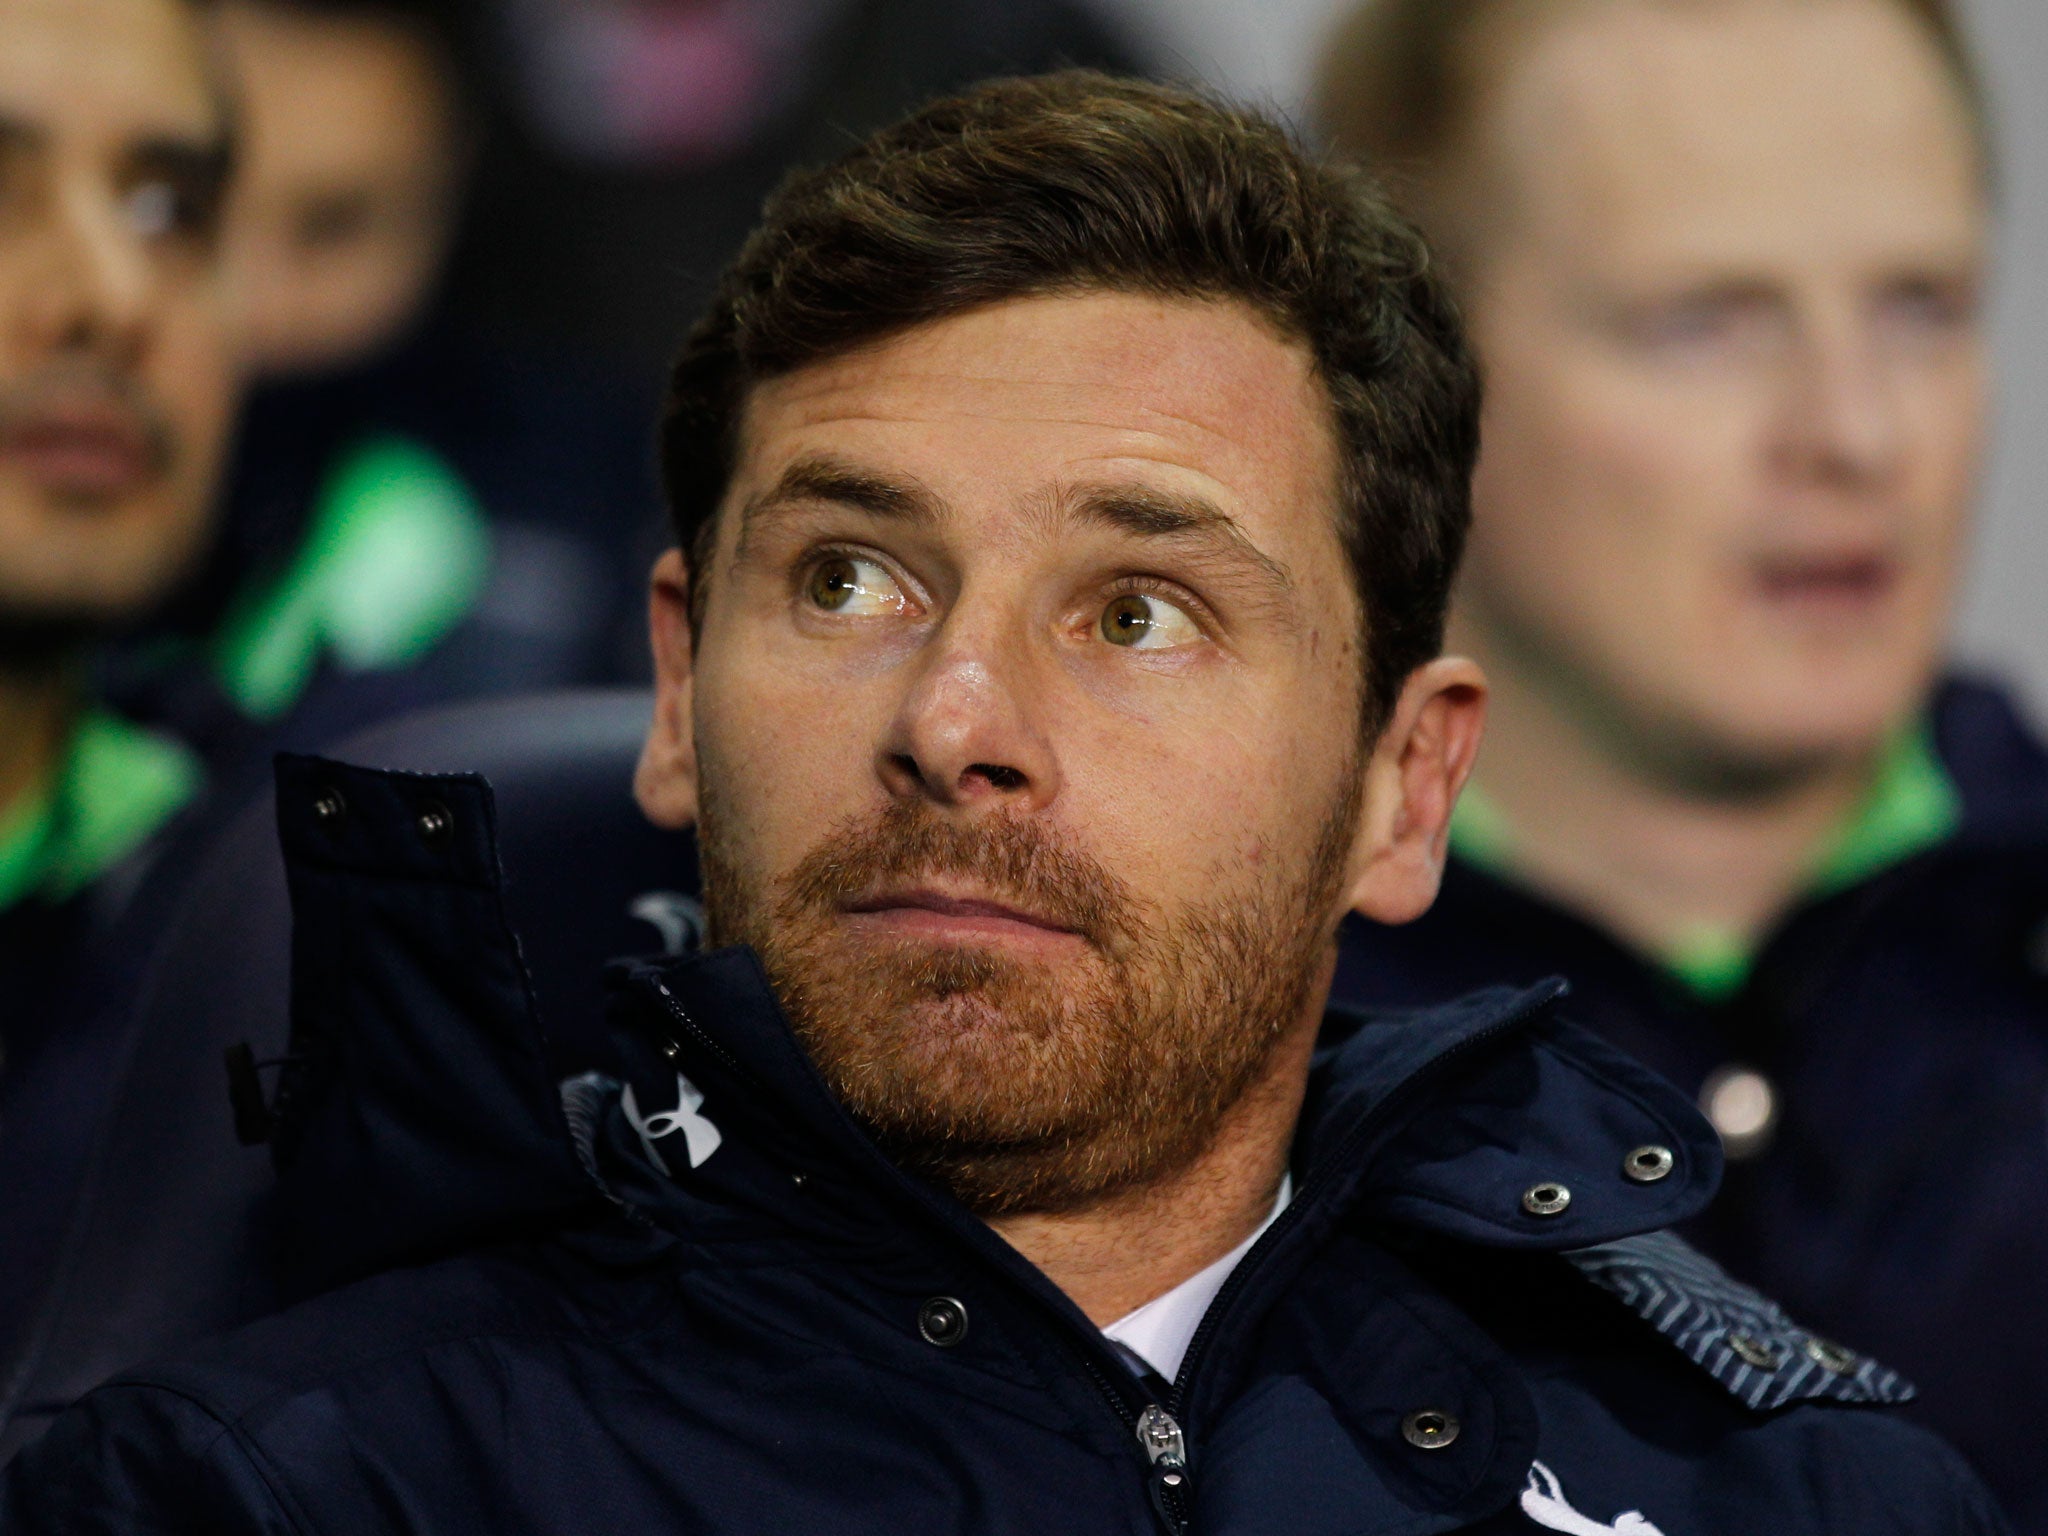 Andre Villas-Boas's future at Tottenham is in doubt after the humiliating 5-0 home defeat to Liverpool